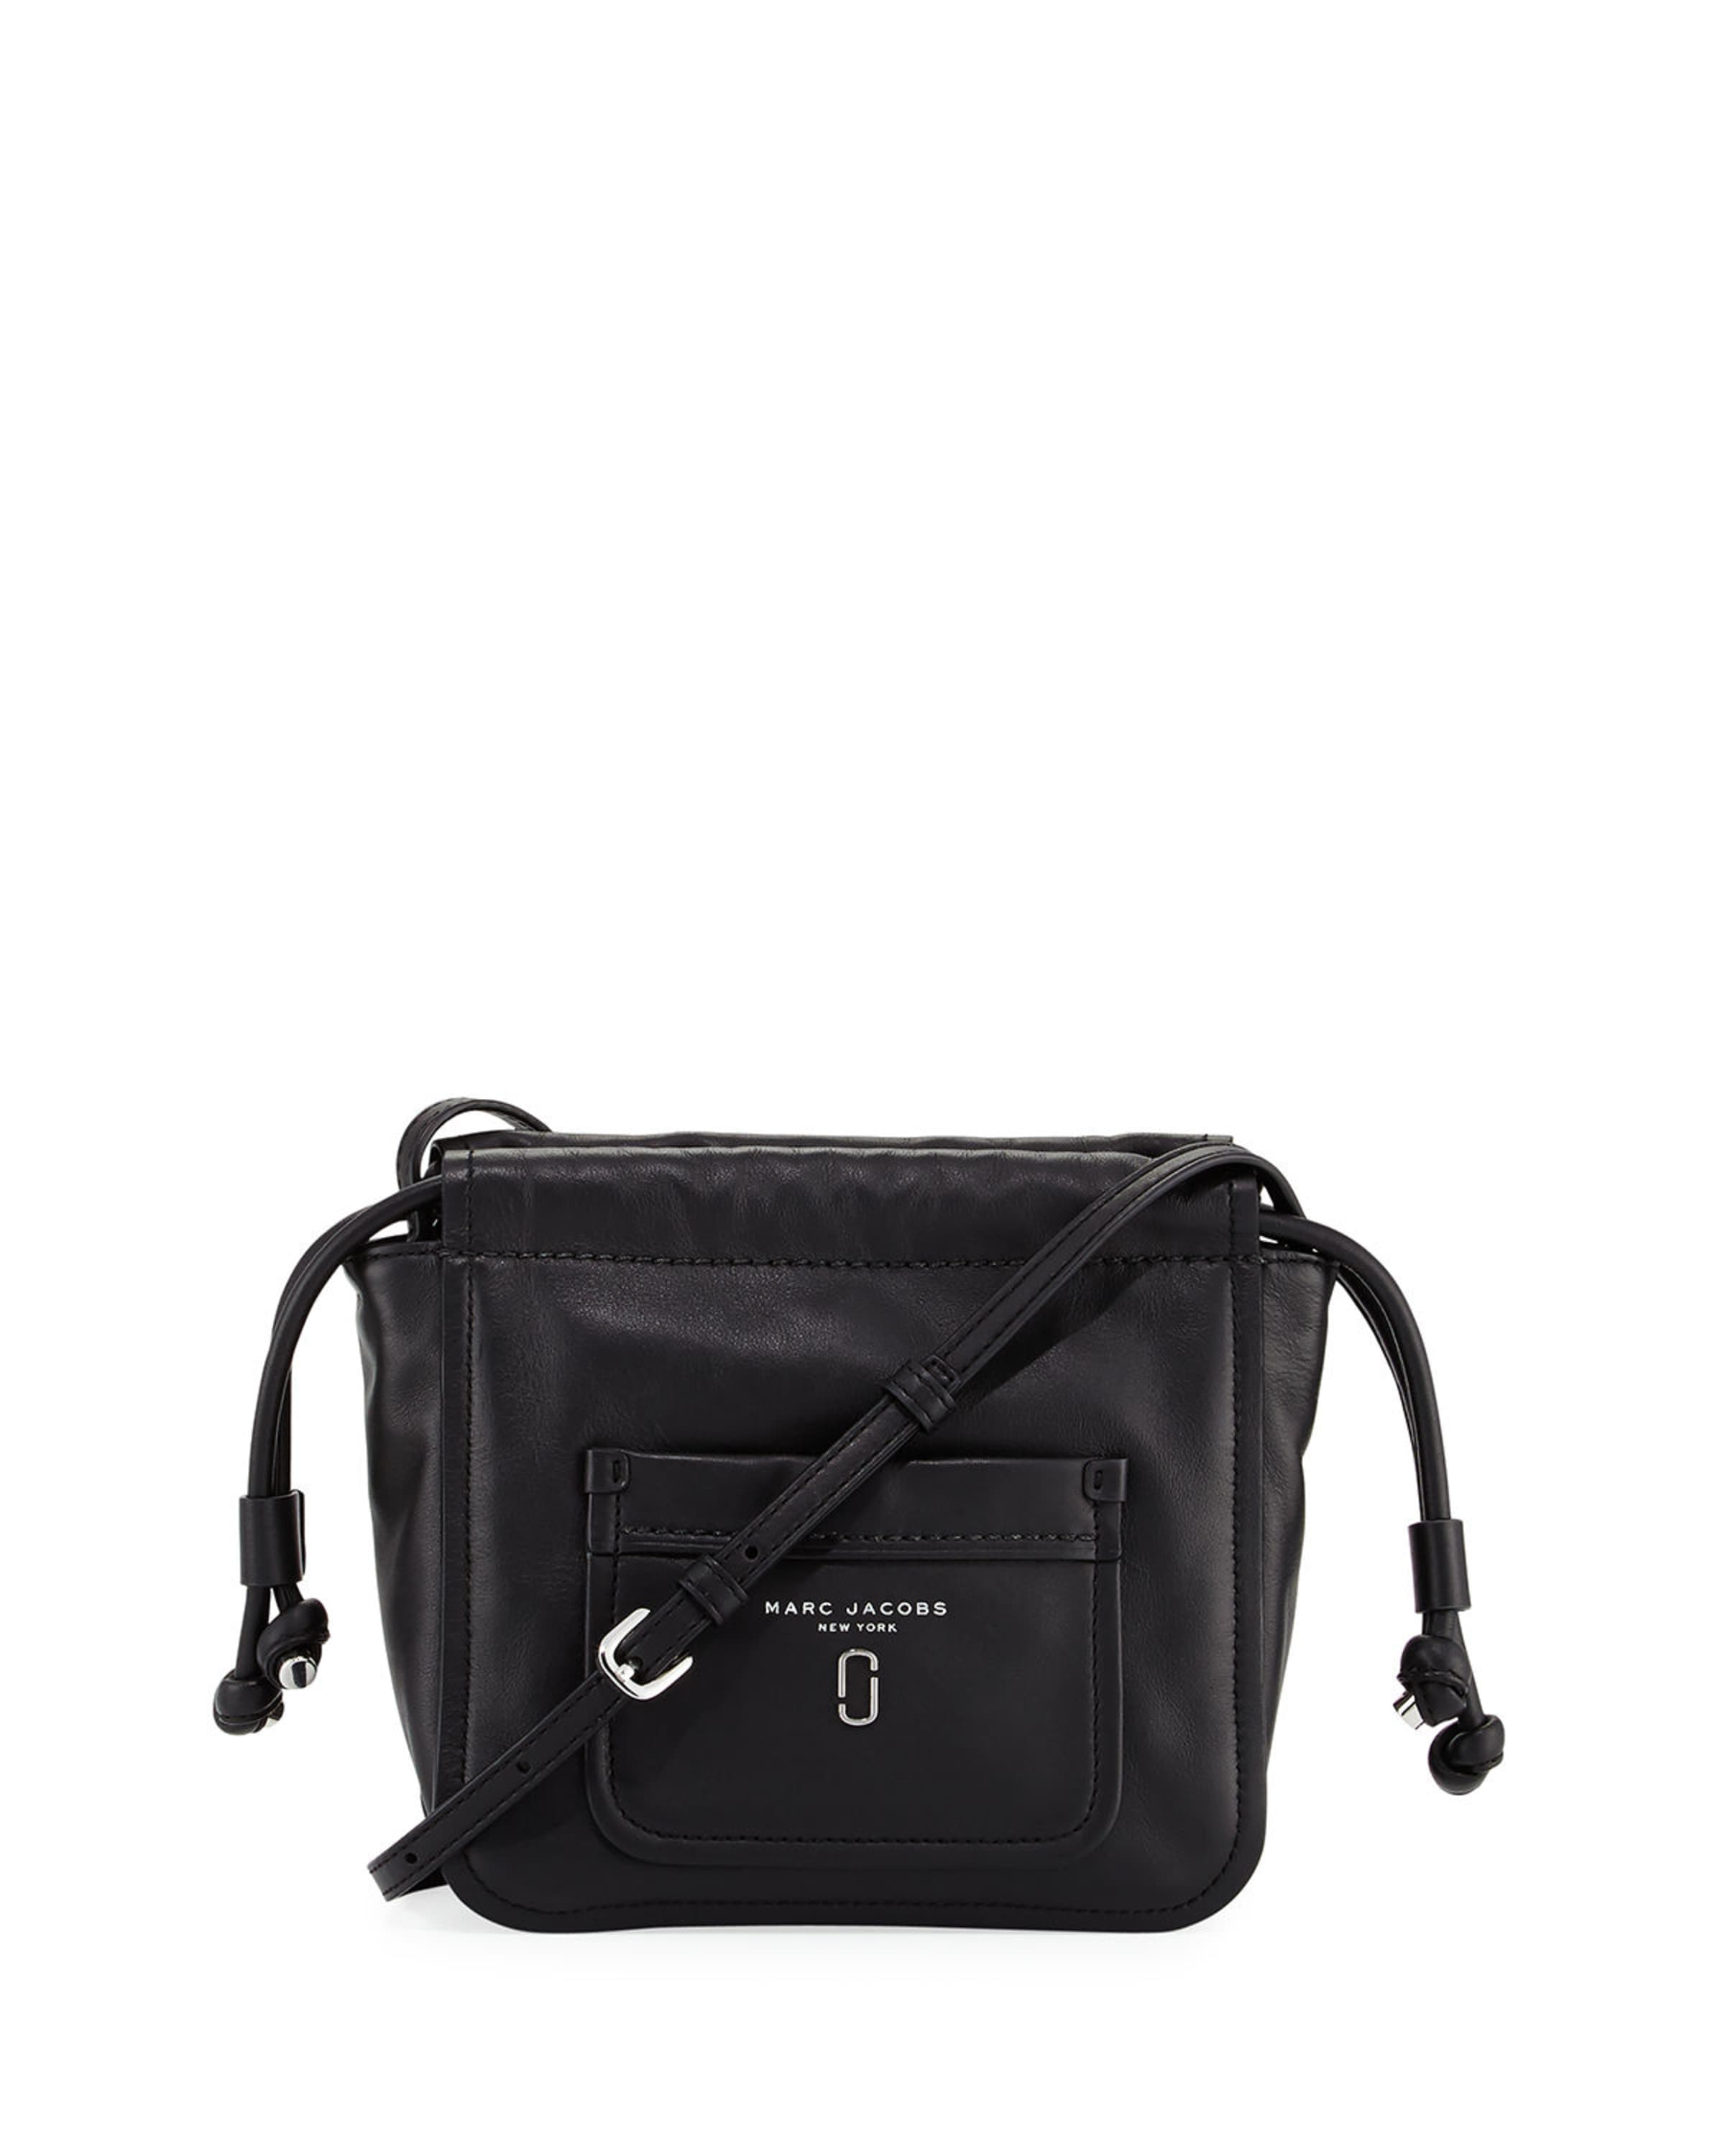 Marc Jacobs Tied Up Crossbody